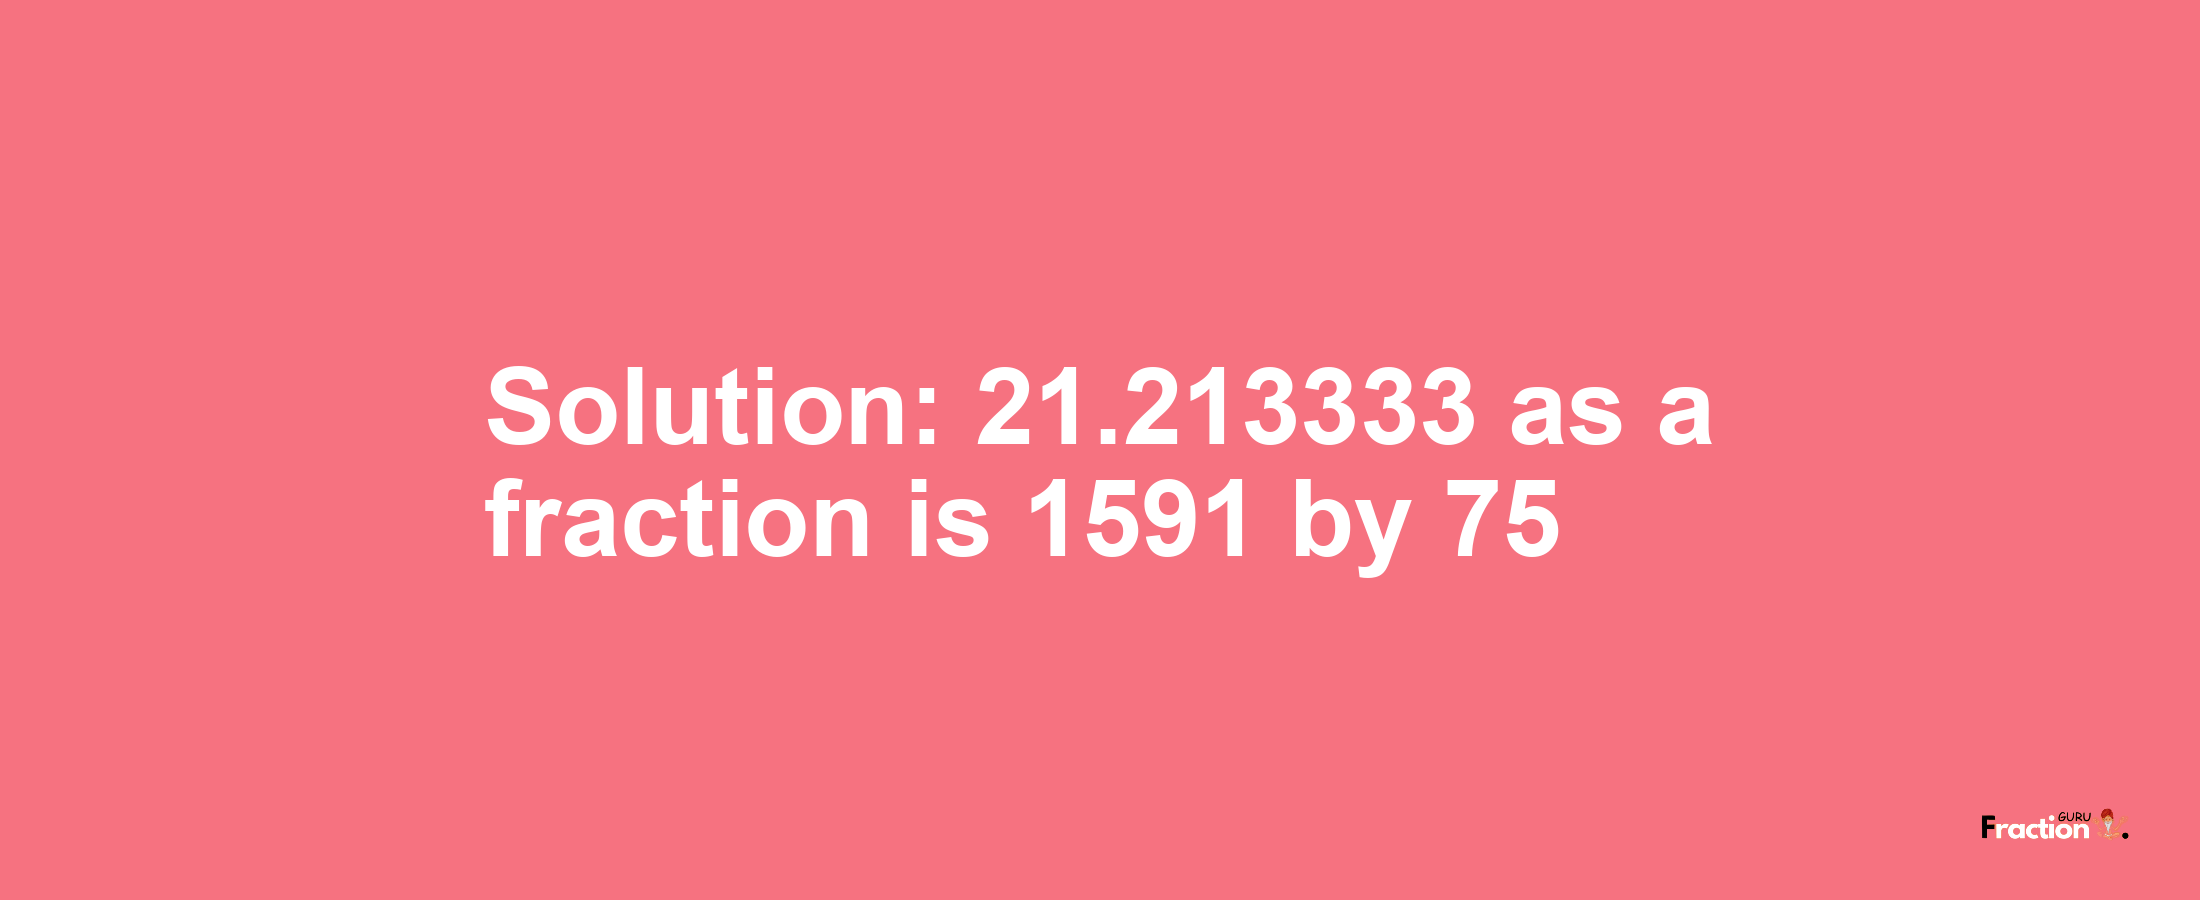 Solution:21.213333 as a fraction is 1591/75